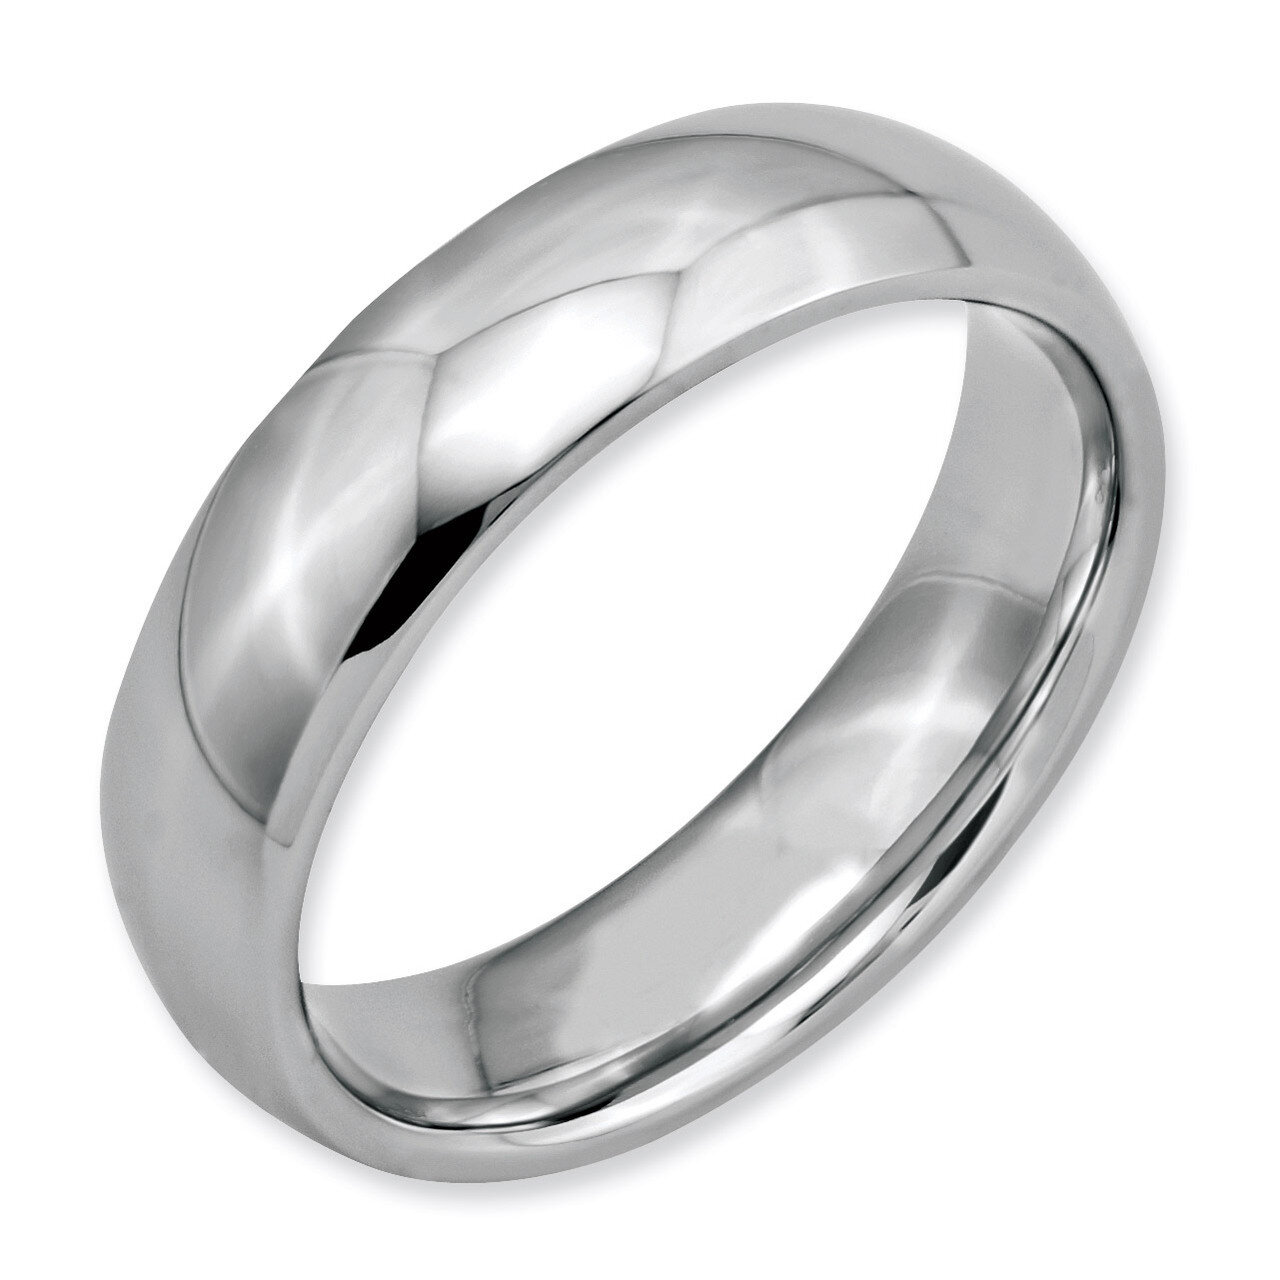 6mm Polished Band - Stainless Steel SR21